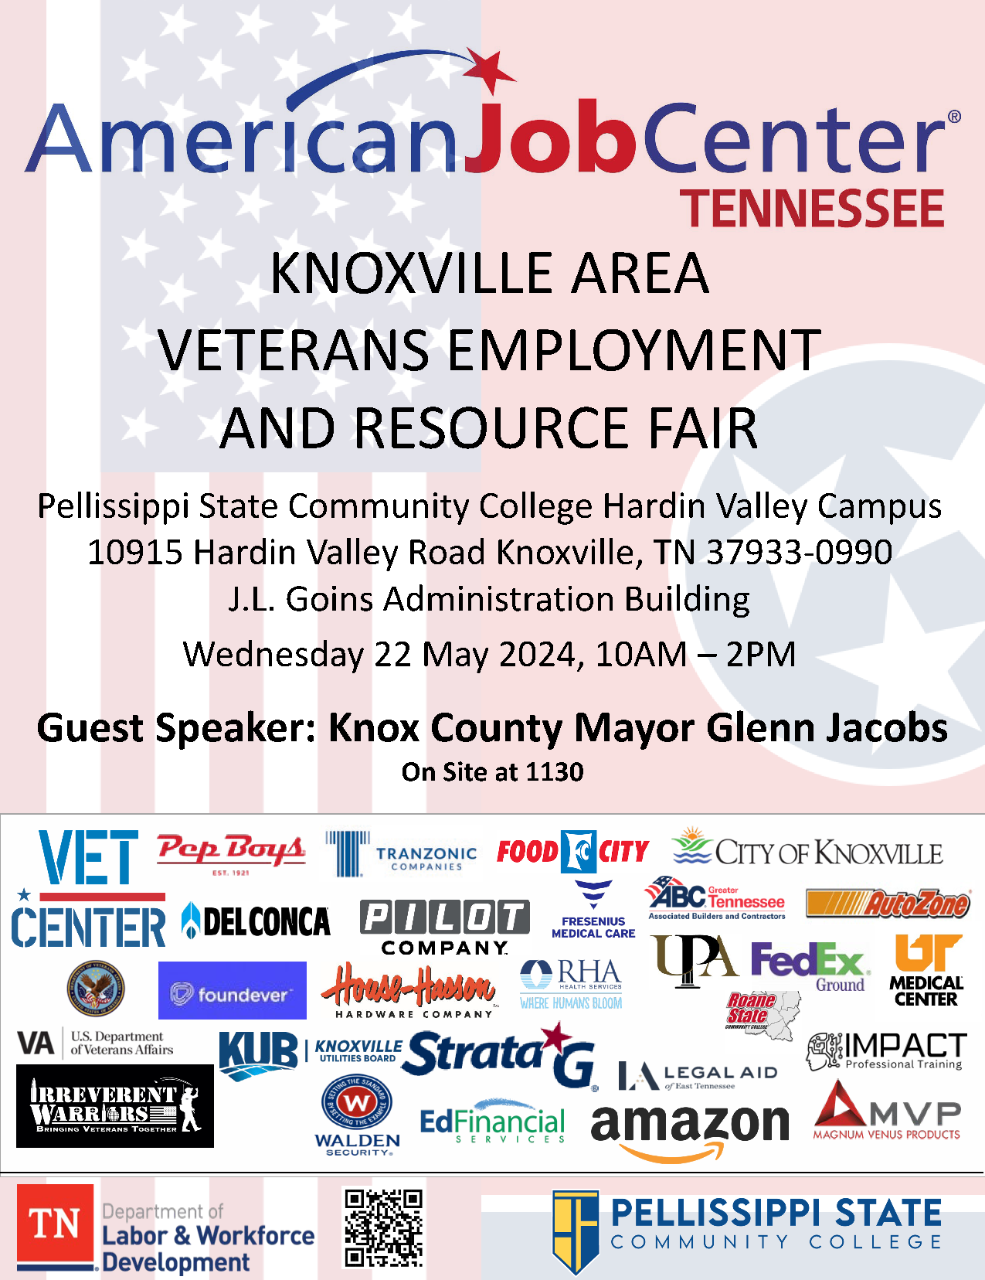 Knoxville Area Employment & Resource Fair is May 22